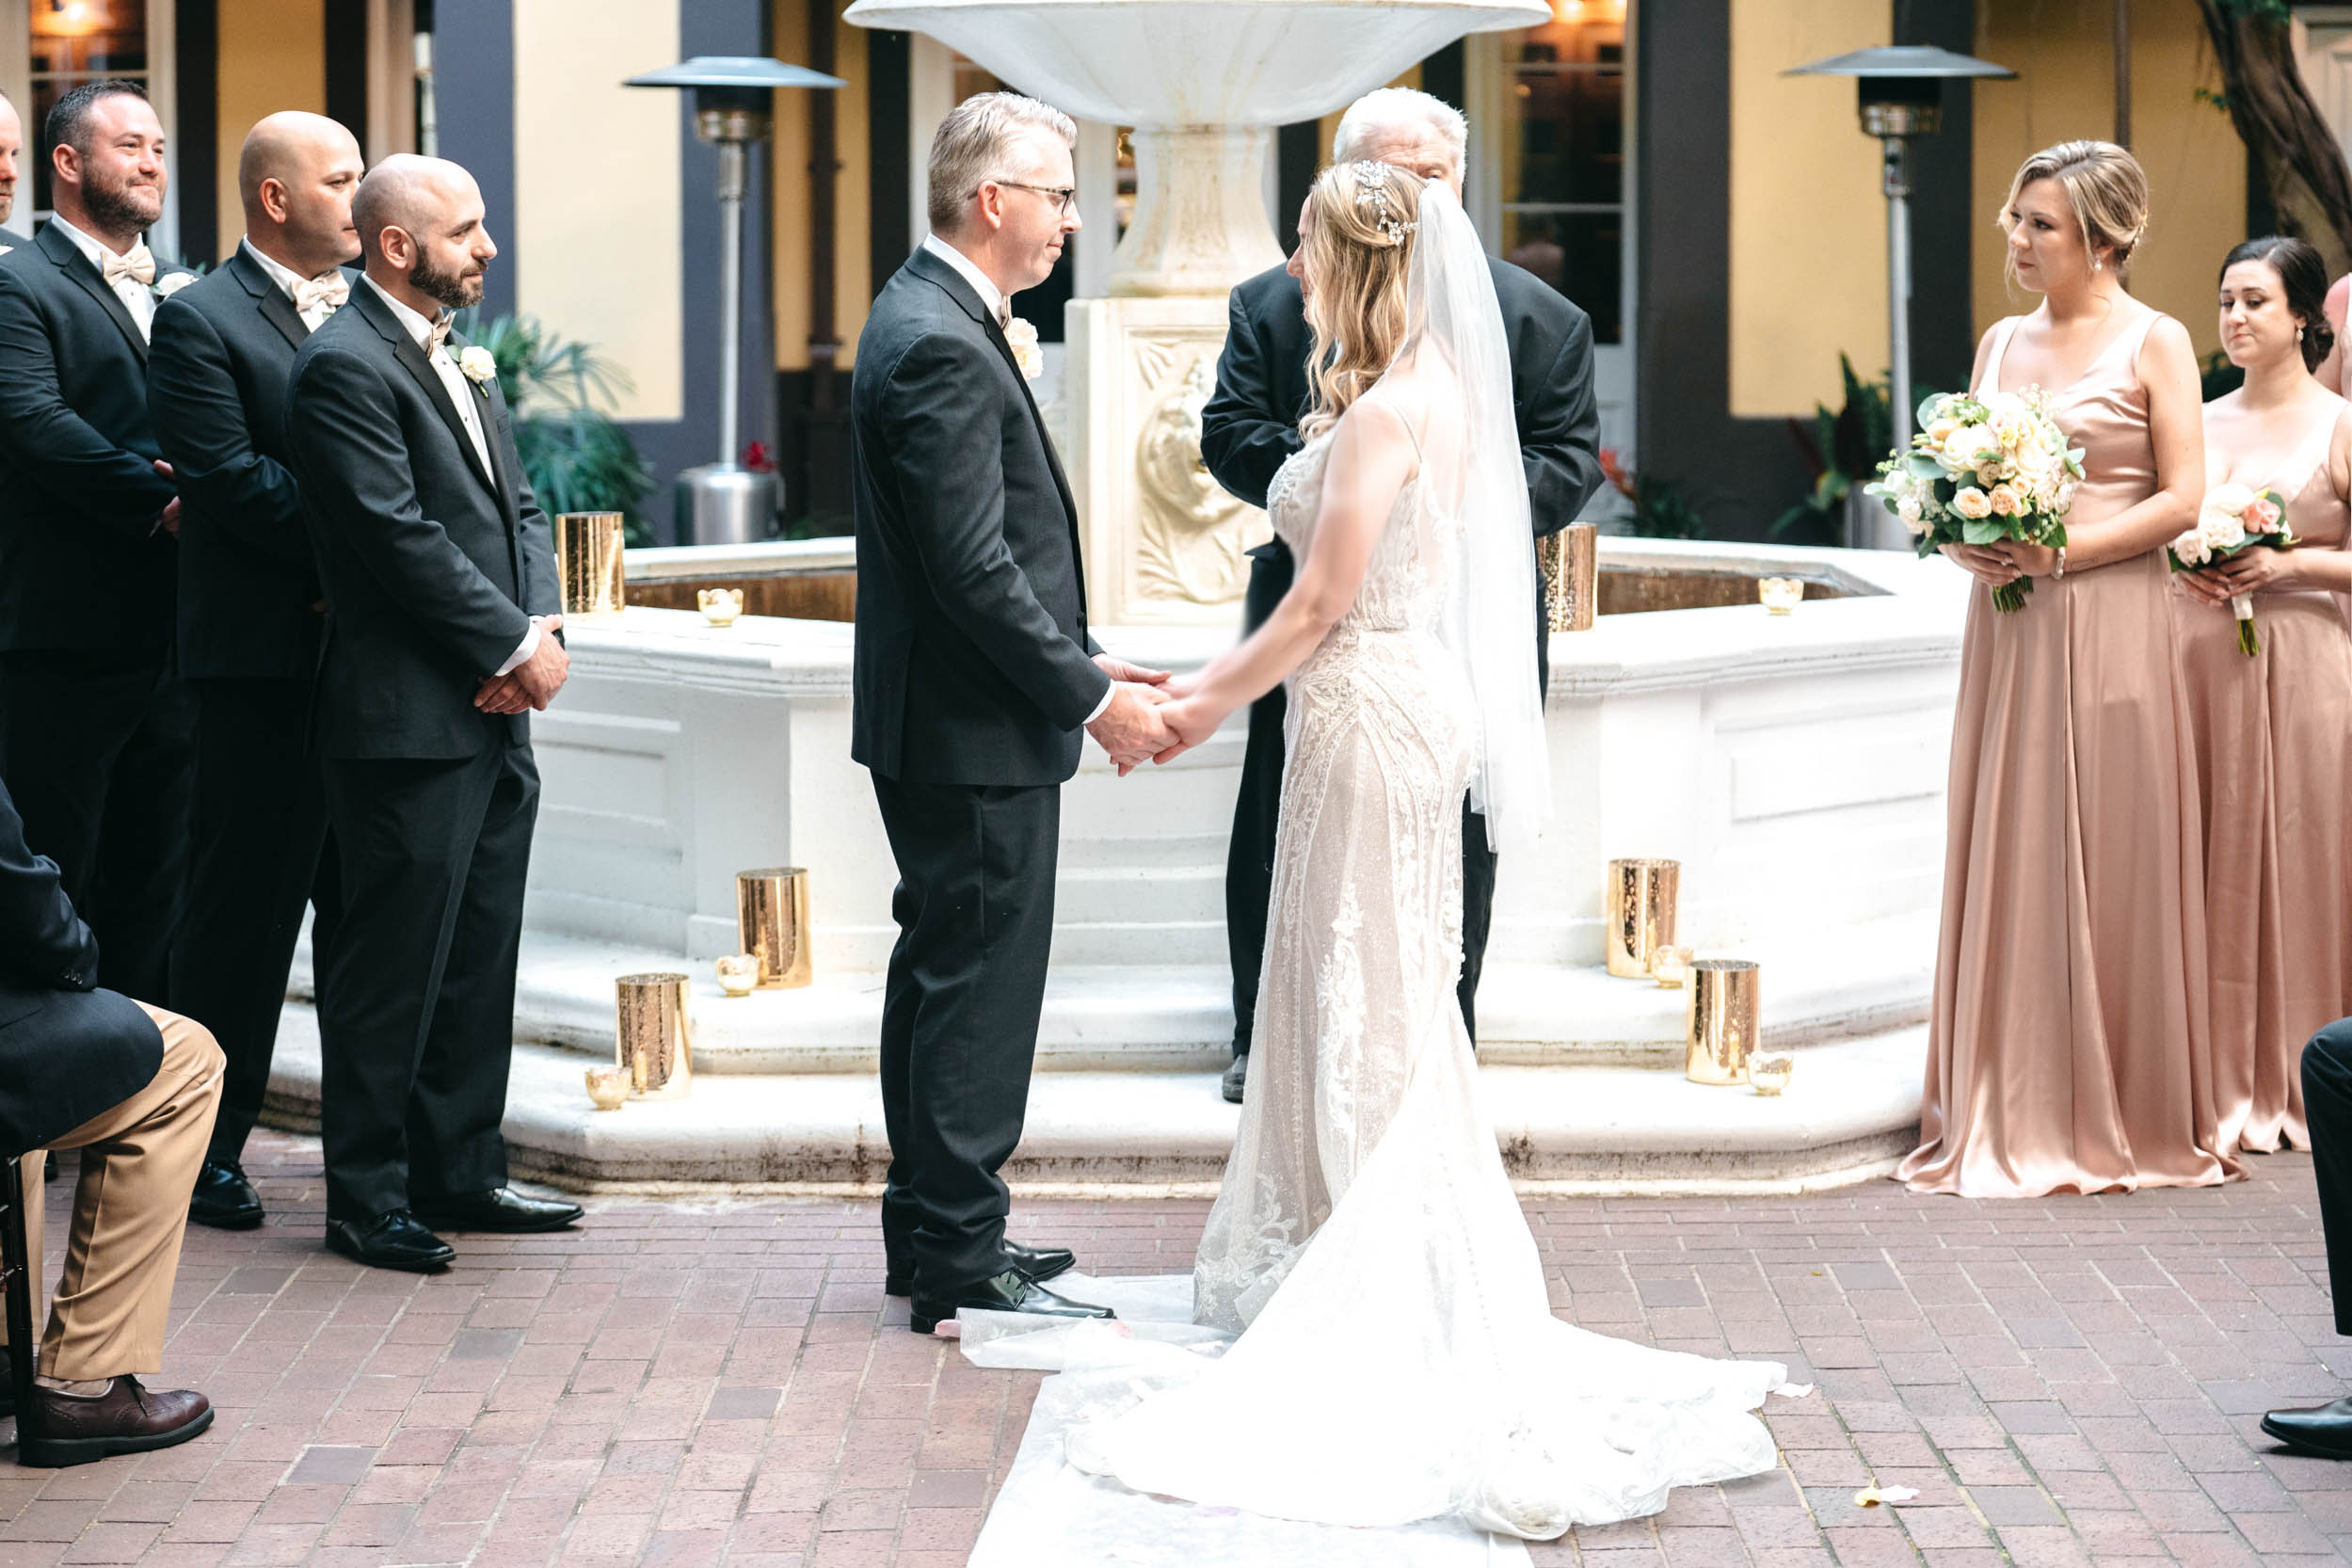 wedding ceremony in courtyard of Hotel Mazarin in The French Quarter of New Orleans